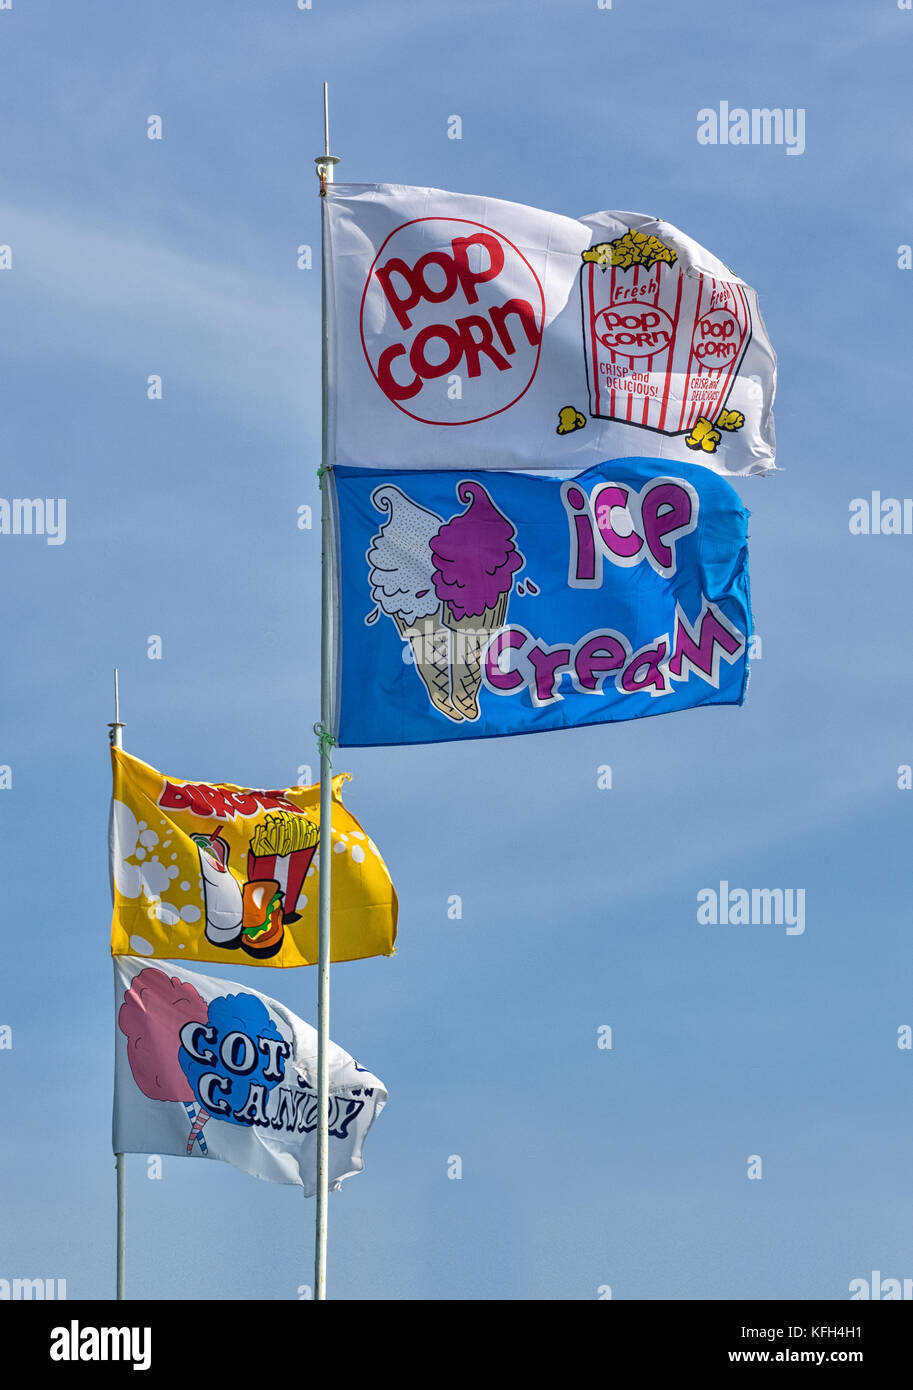 SOUTHEND-ON-SEA, ESSEX, UK - AUGUST 28, 2017:  Advertising Flags flying above beachfront shop selling Ice Cream, Popcorn, Cotton Candy (Candy Floss) a Stock Photo